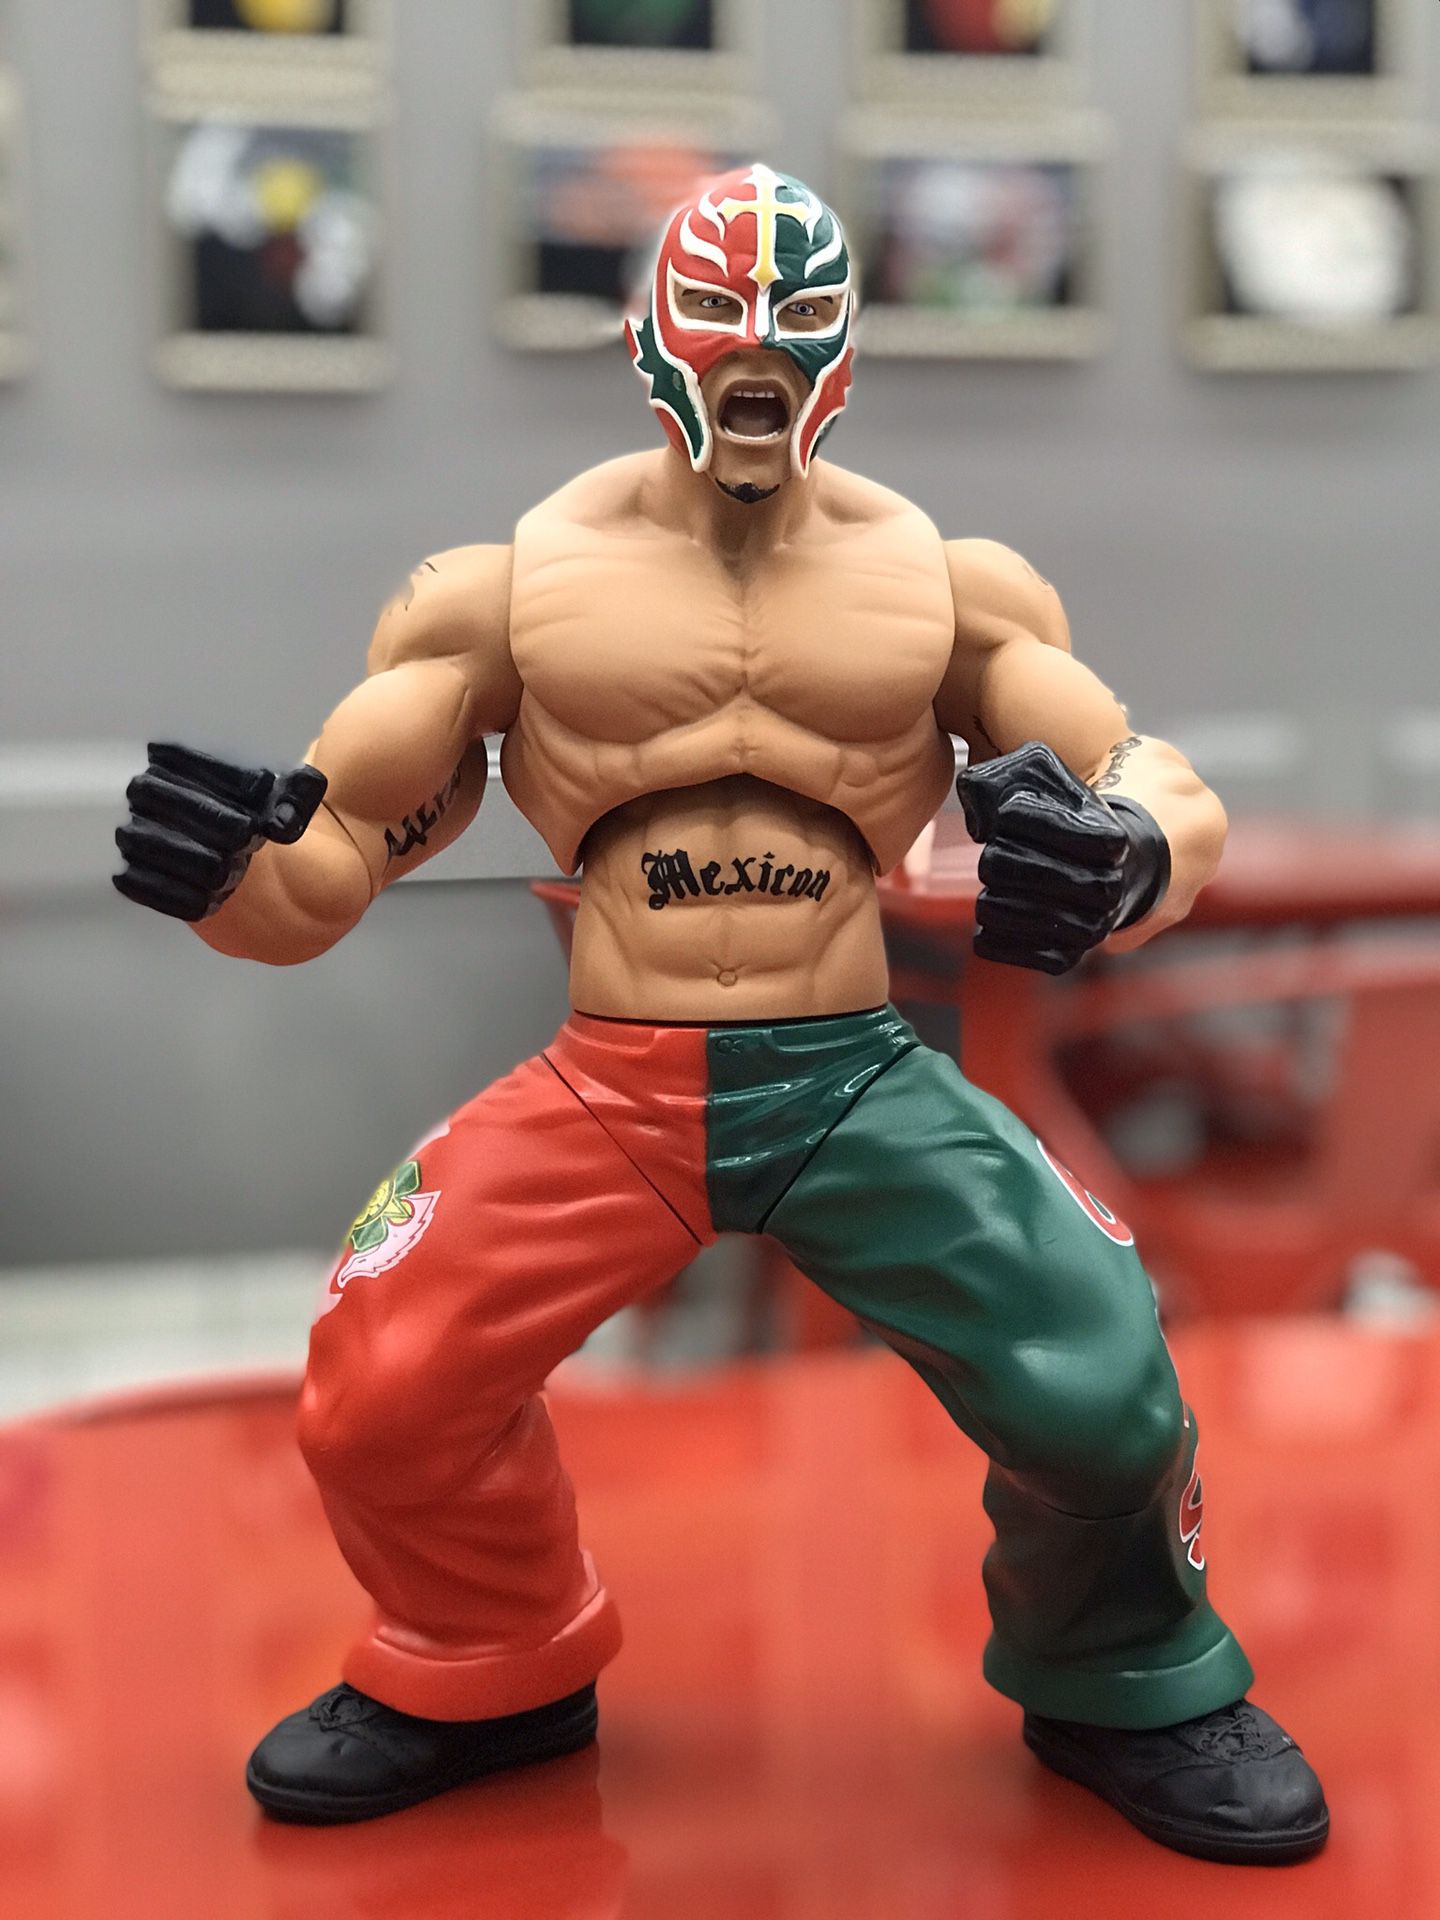 Rey Misterio Tall 12” RARE ACTION FIGURE LUCHADOR WWE CMLL NJW NewJapanWrestling. Condition is Used. Shipped with USPS First Class Package. Rey Mis